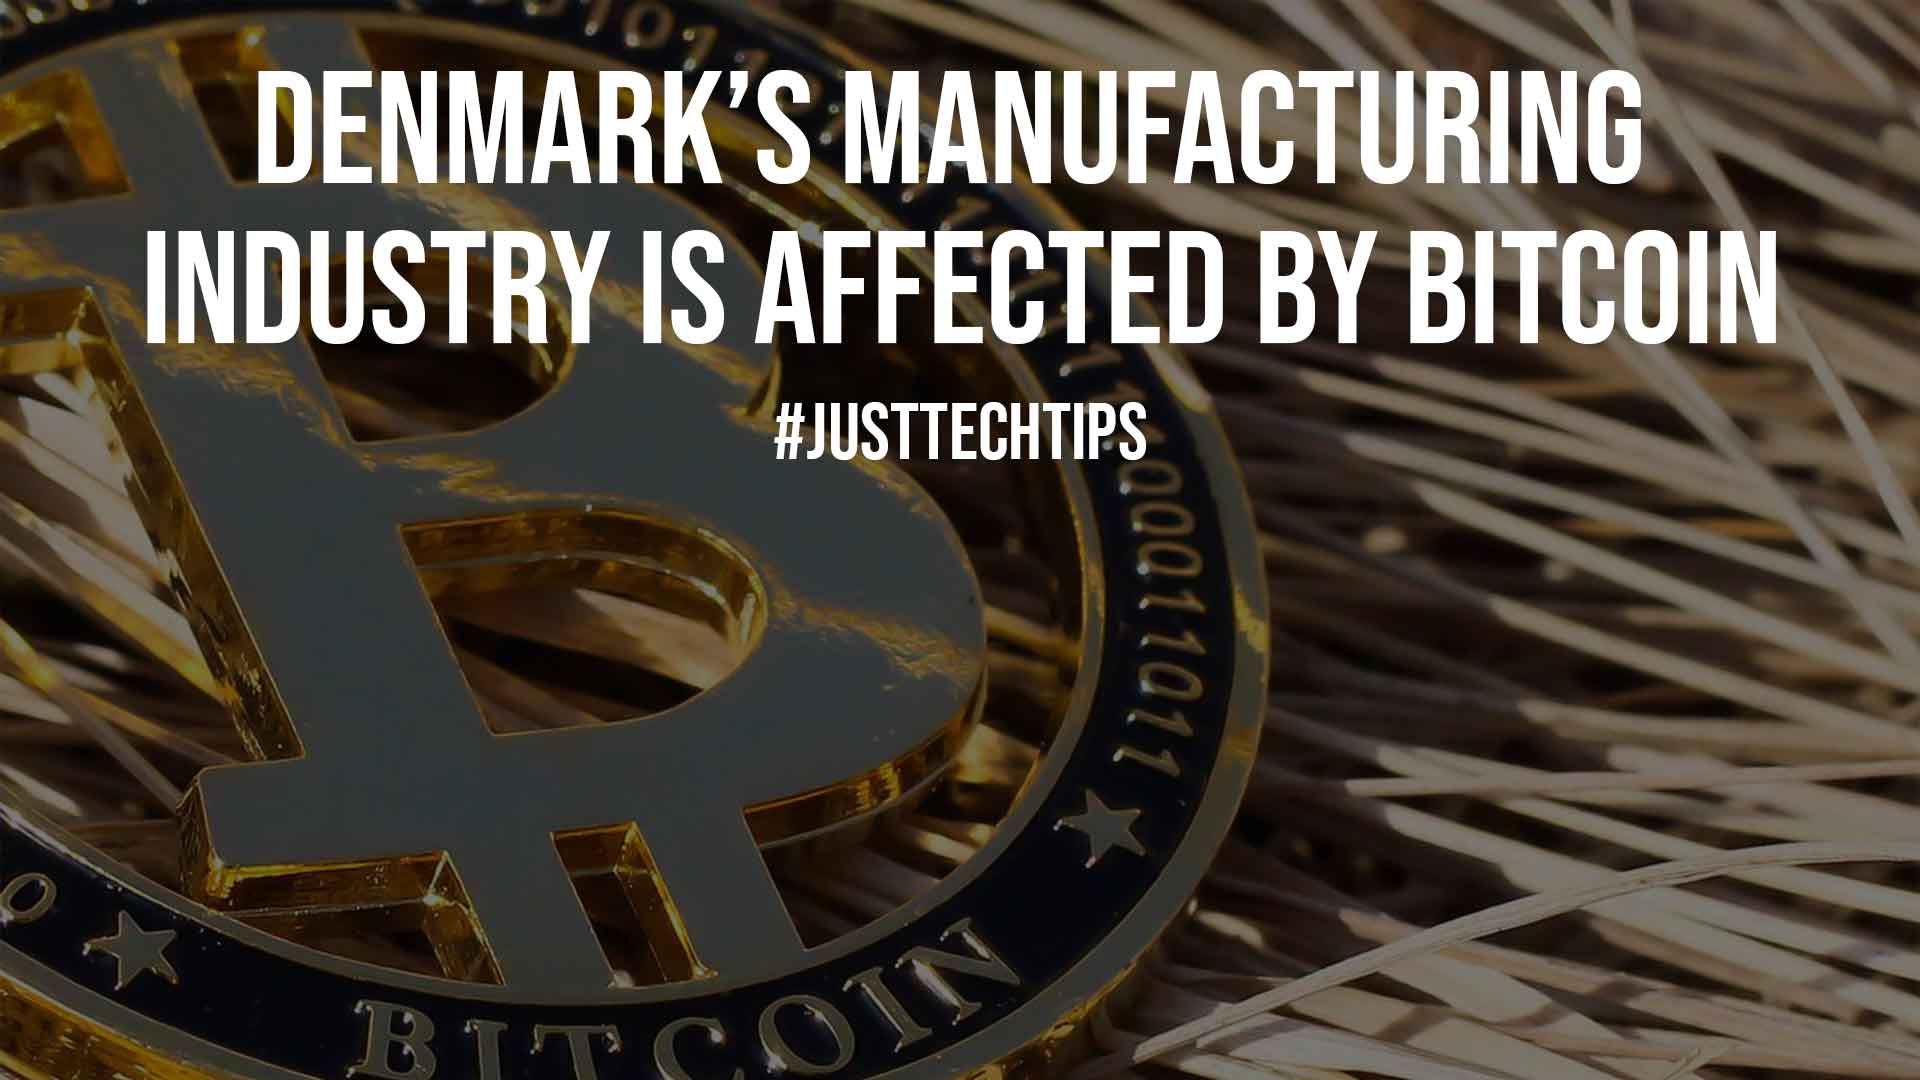 How Denmarks Manufacturing Industry is Affected by Bitcoin